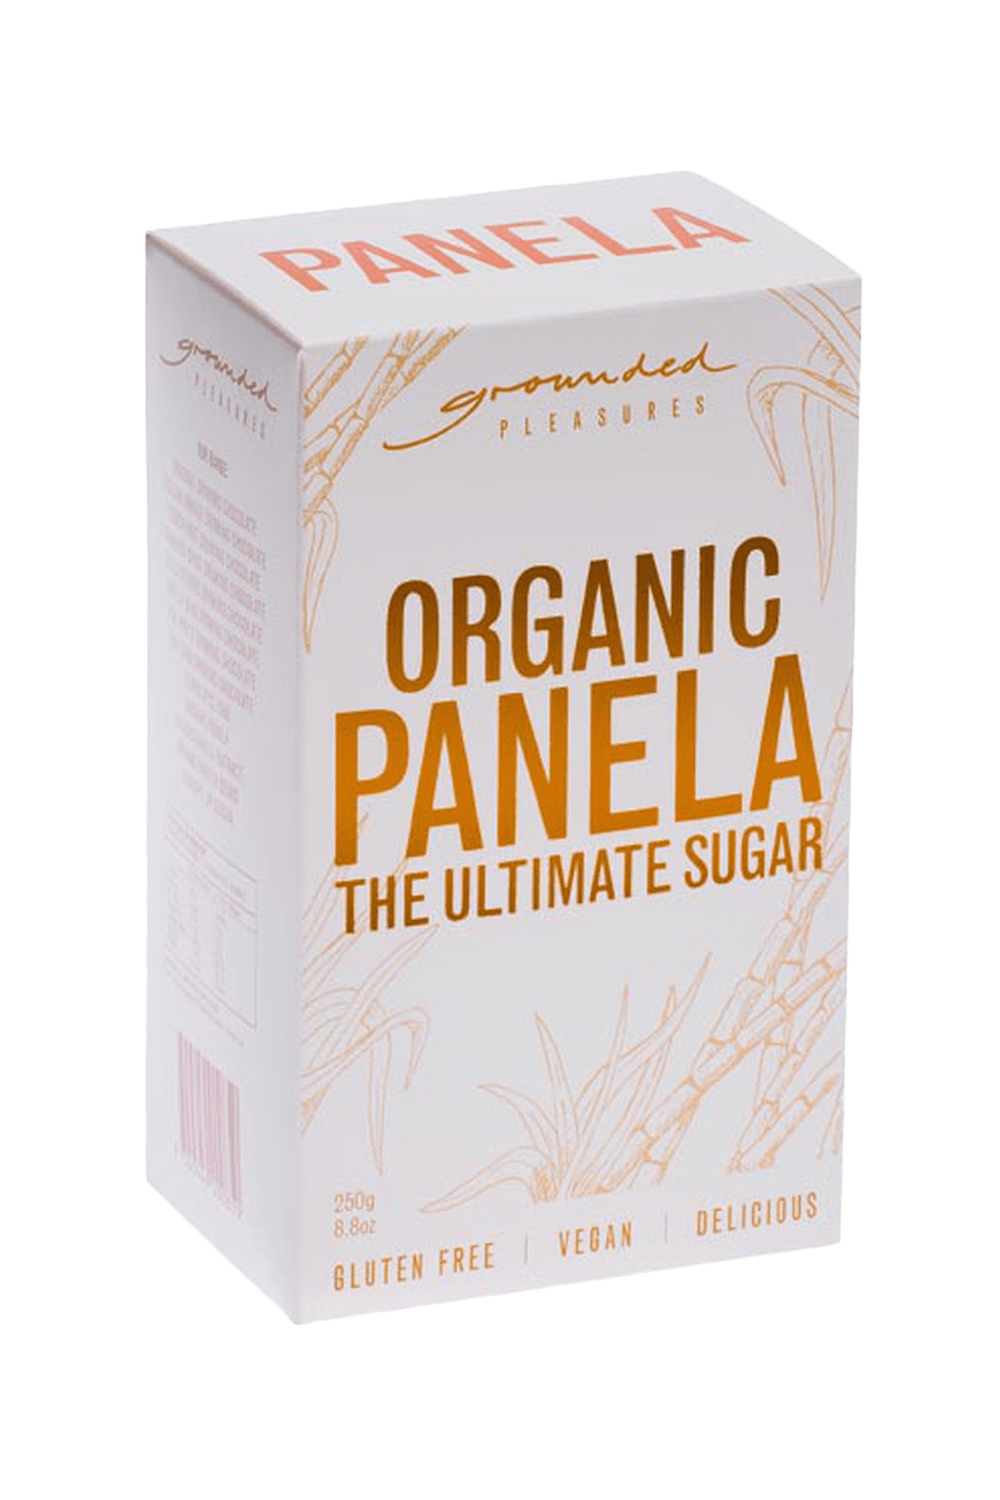 buy cafe products grounded pleasures drinking chocolate organic panela